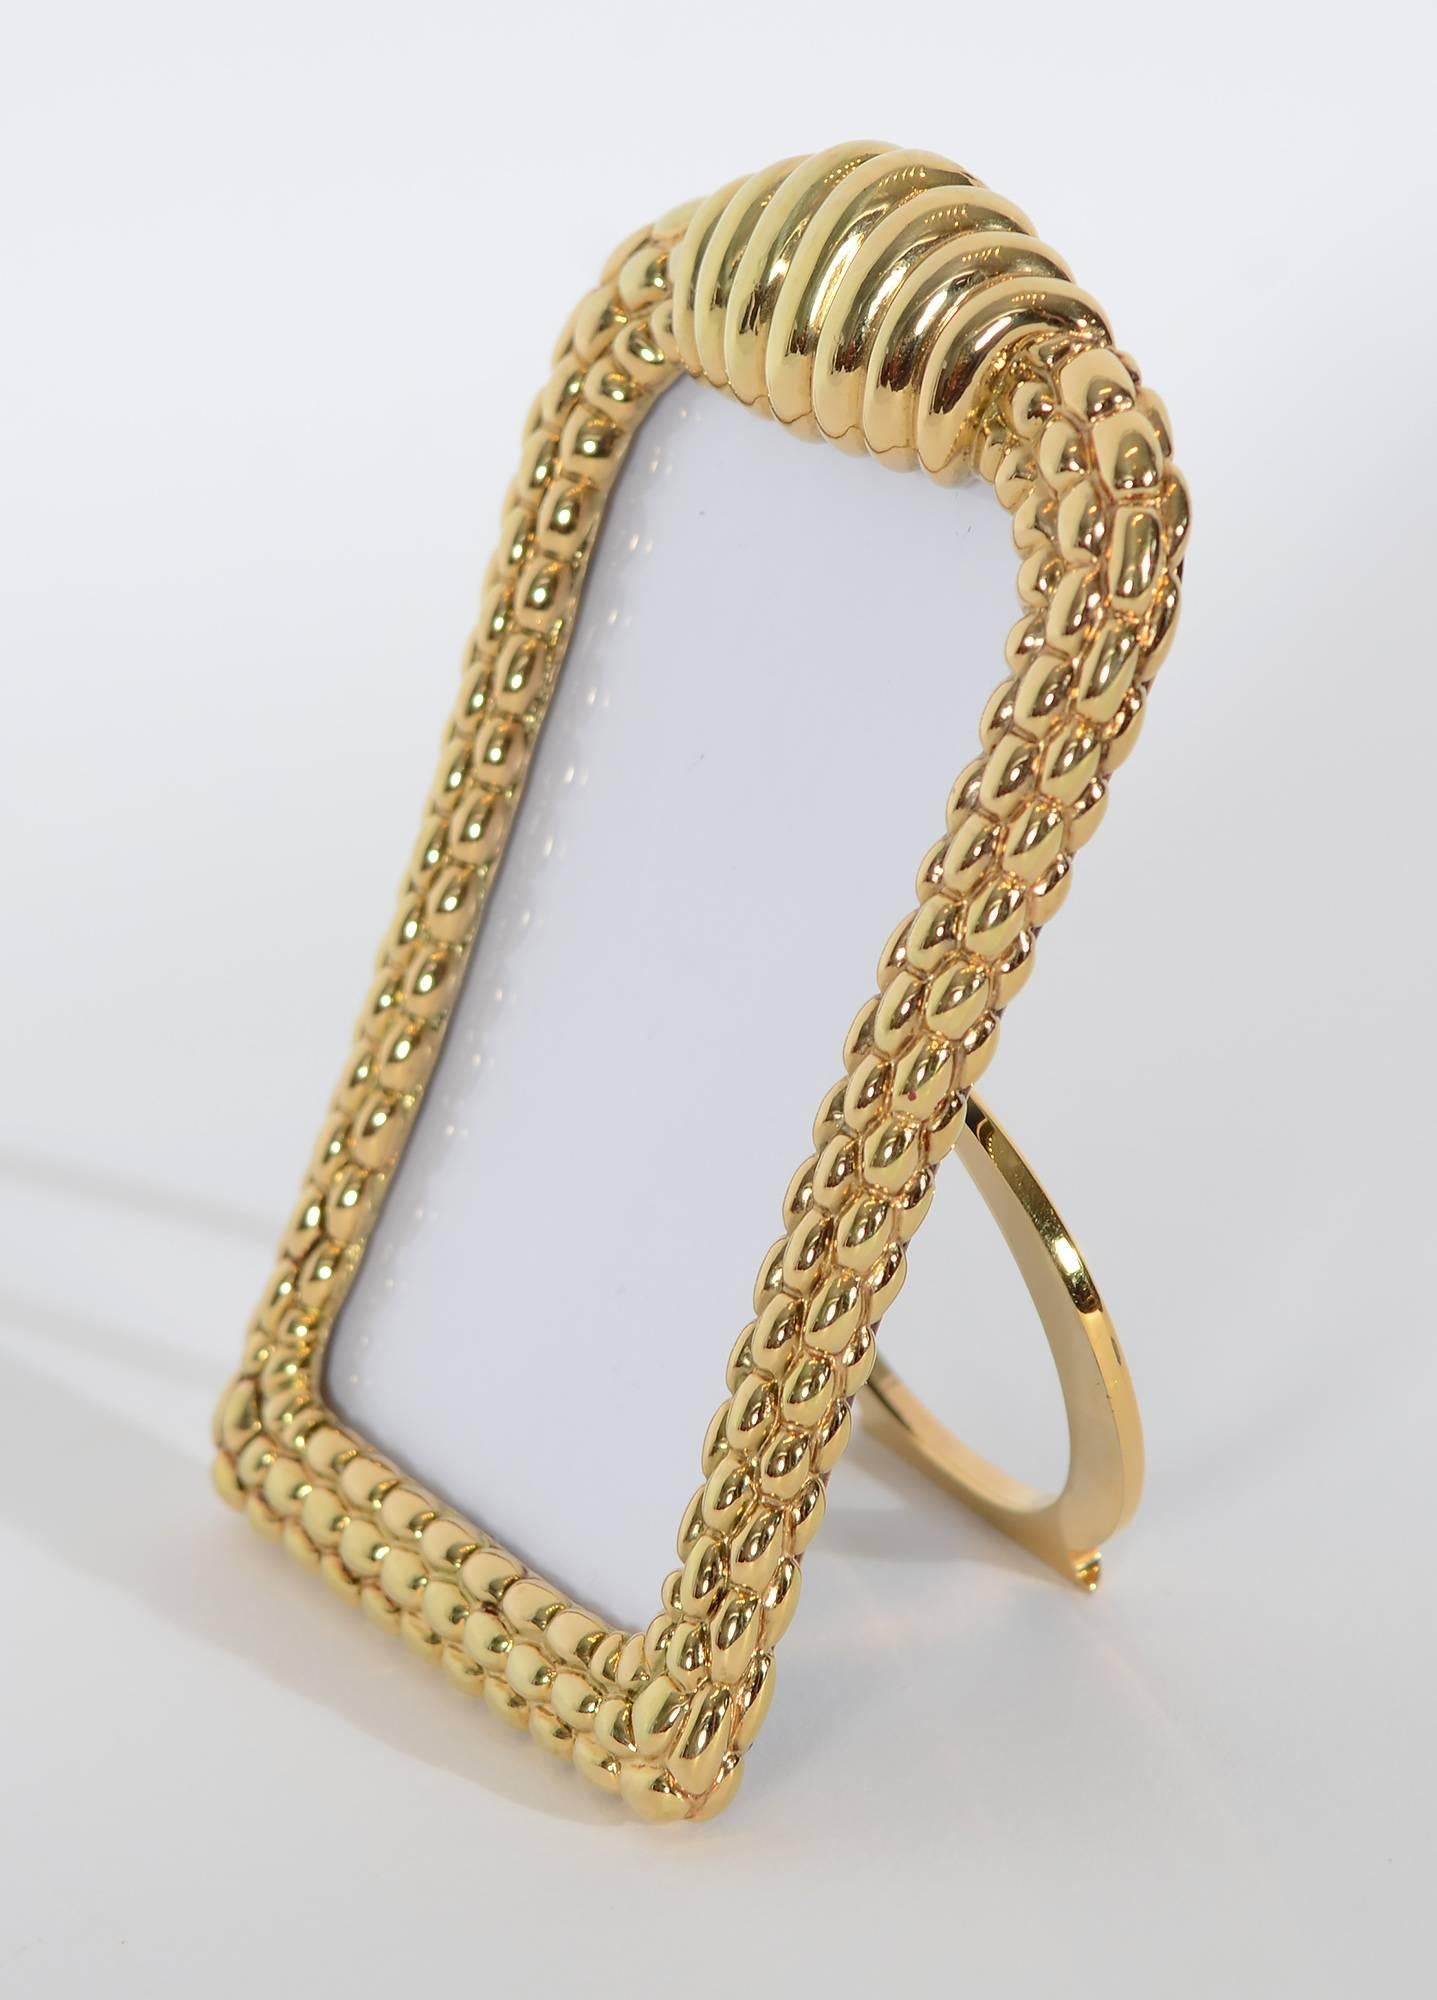 How better to remember a special  person or event than in this elegant gold picture frame by Fope Gioielli?  Fope has been creating fine jewelry in Venice since 1929. The sculptural design of this frame is much like the link bracelets for which they